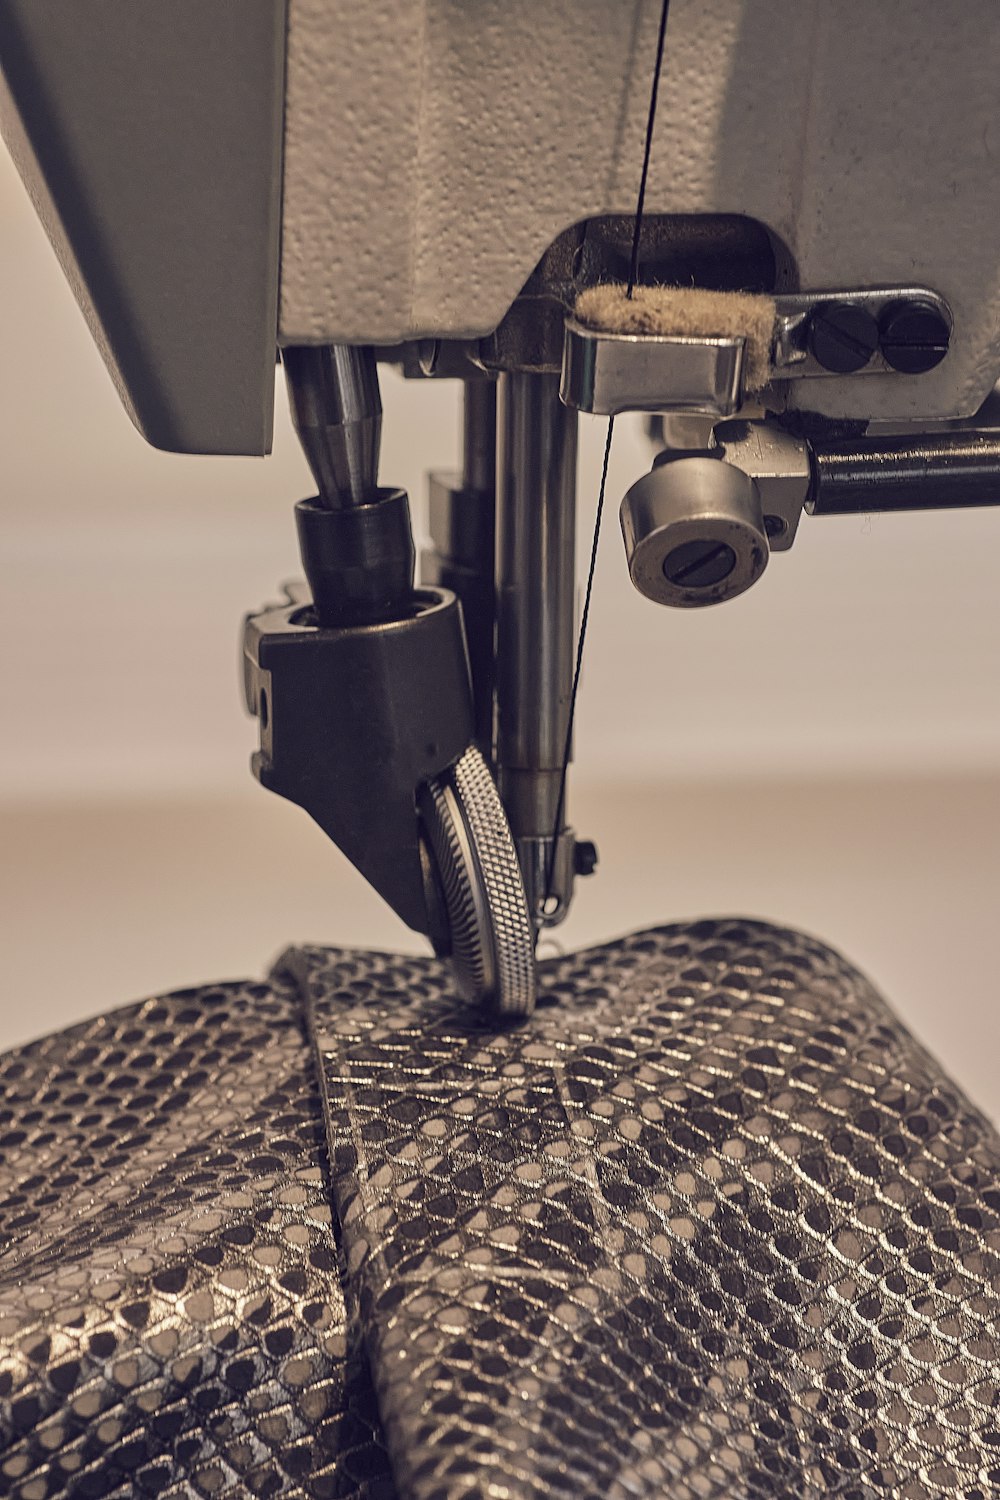 a close up of a sewing machine with a snake skin bag